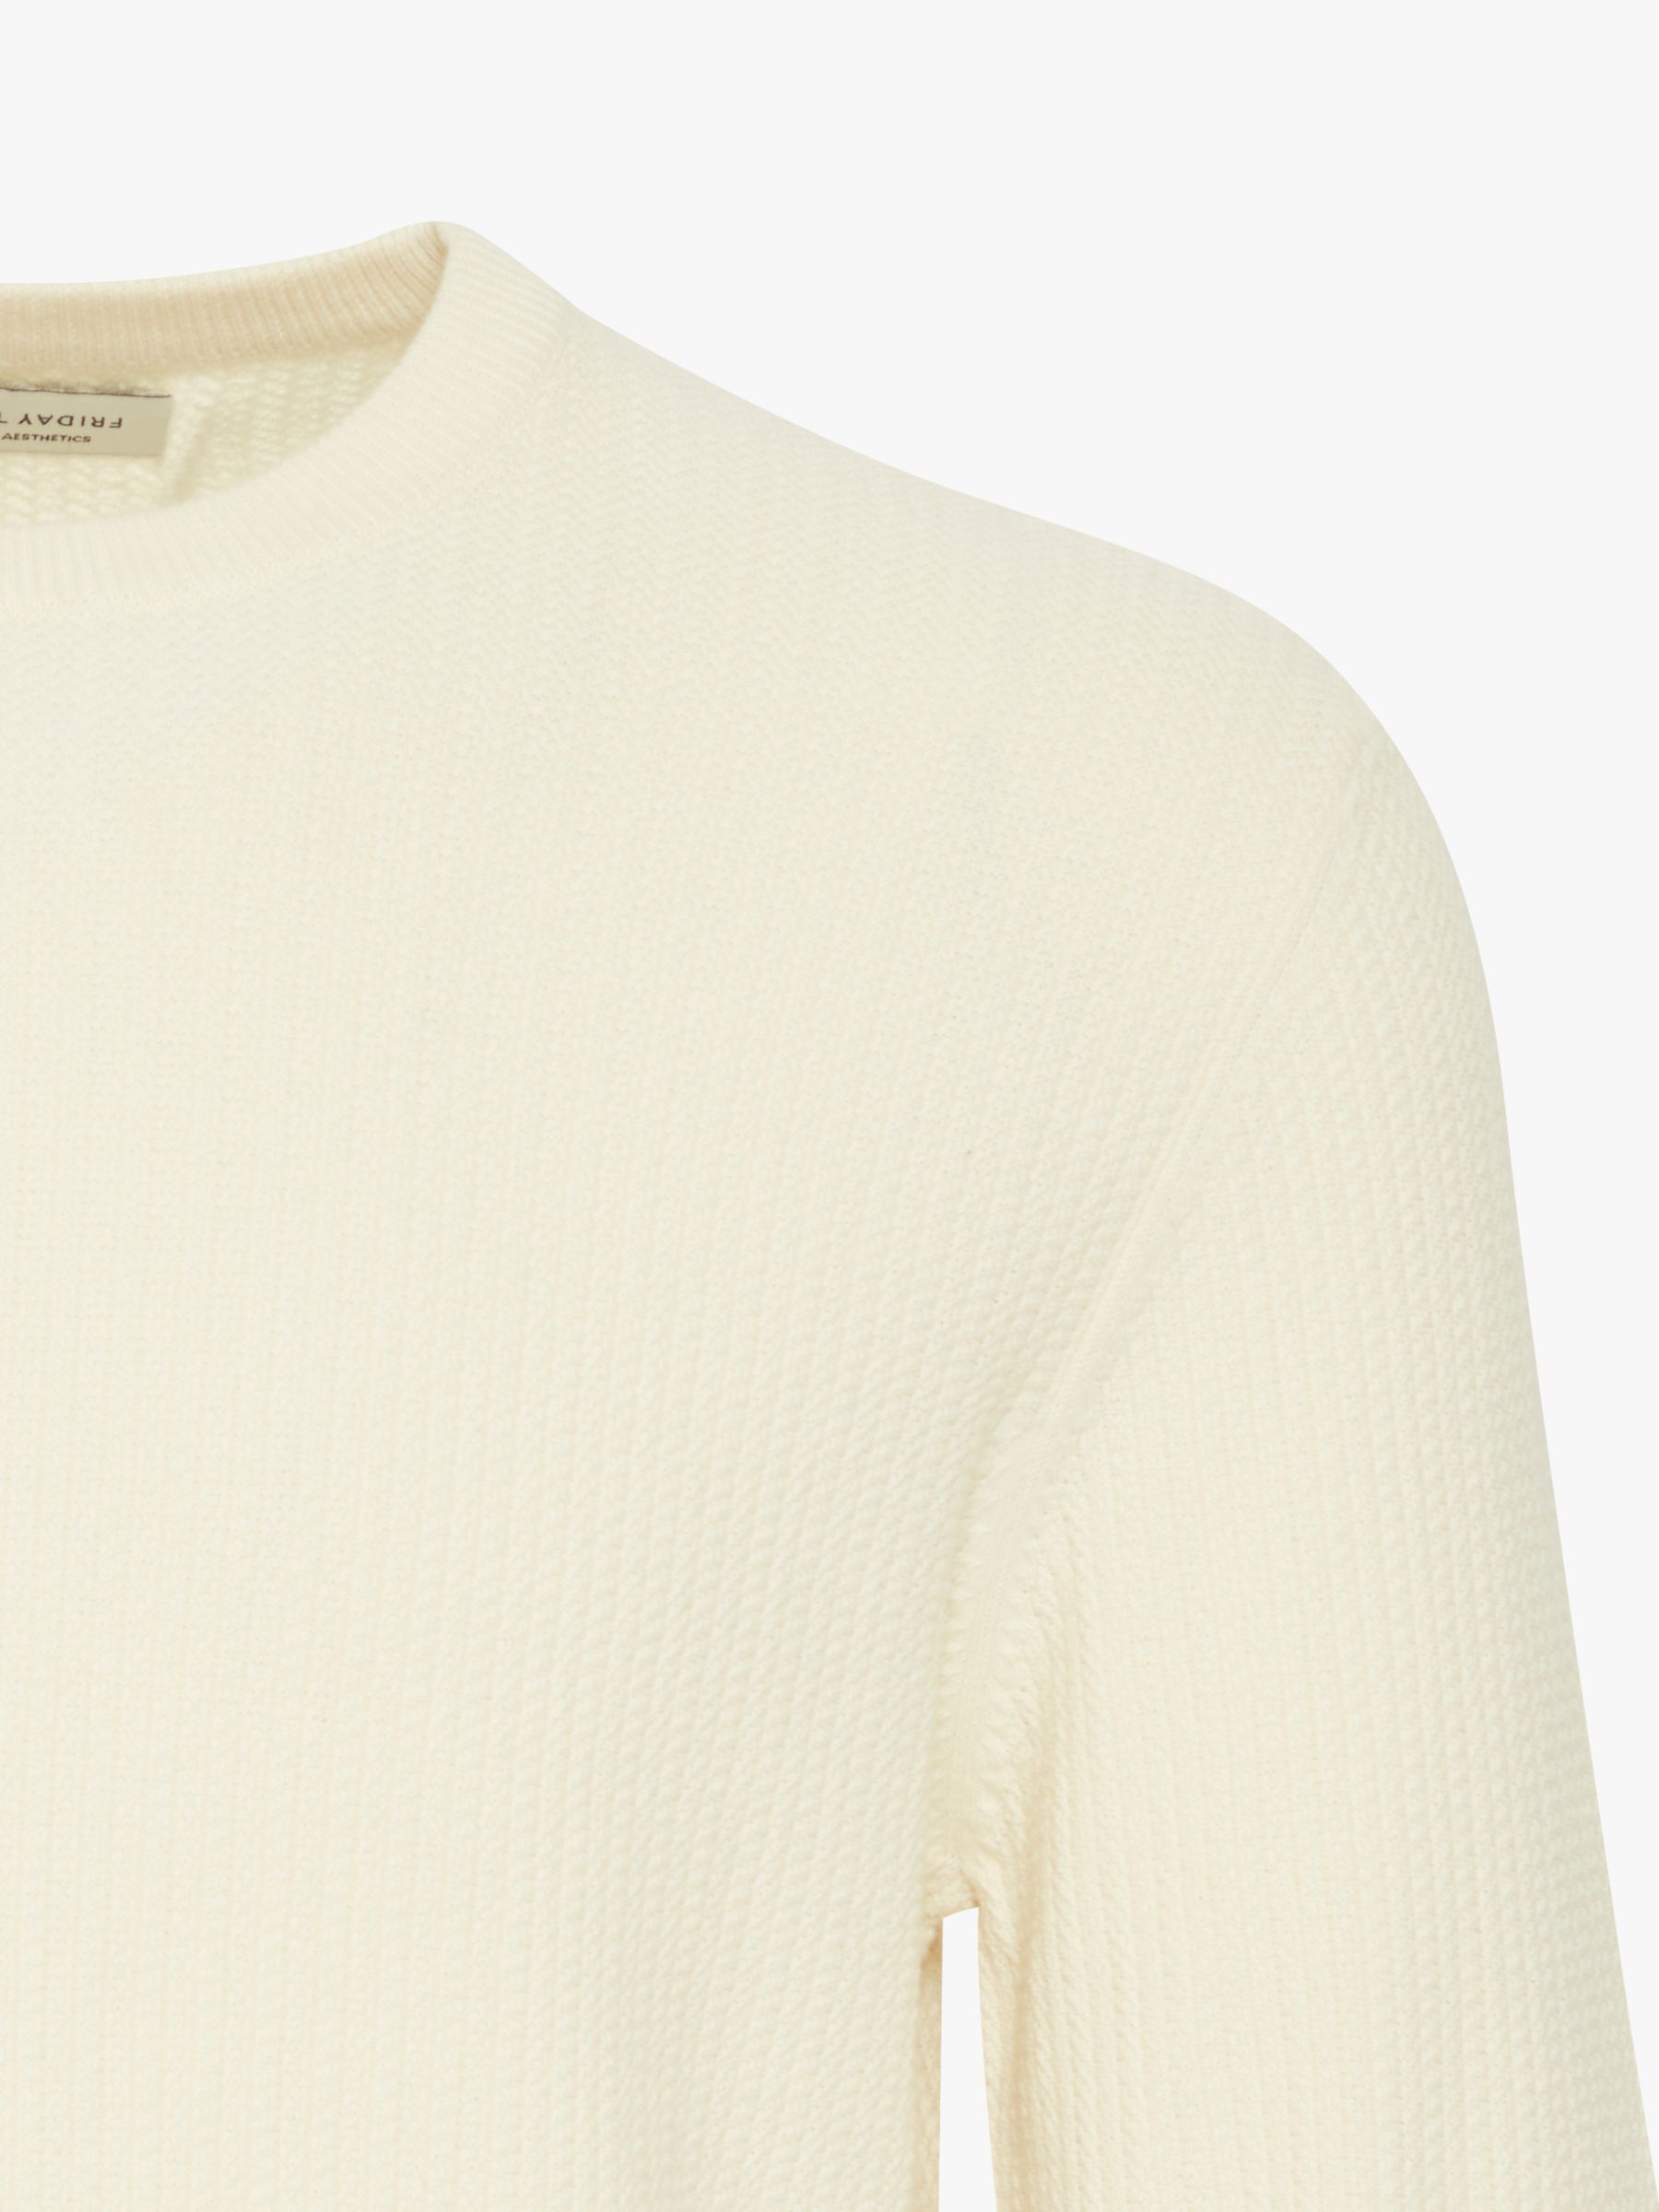 Buy Casual Friday Karl Long Sleeve Crew Neck Knit Jumper Online at johnlewis.com